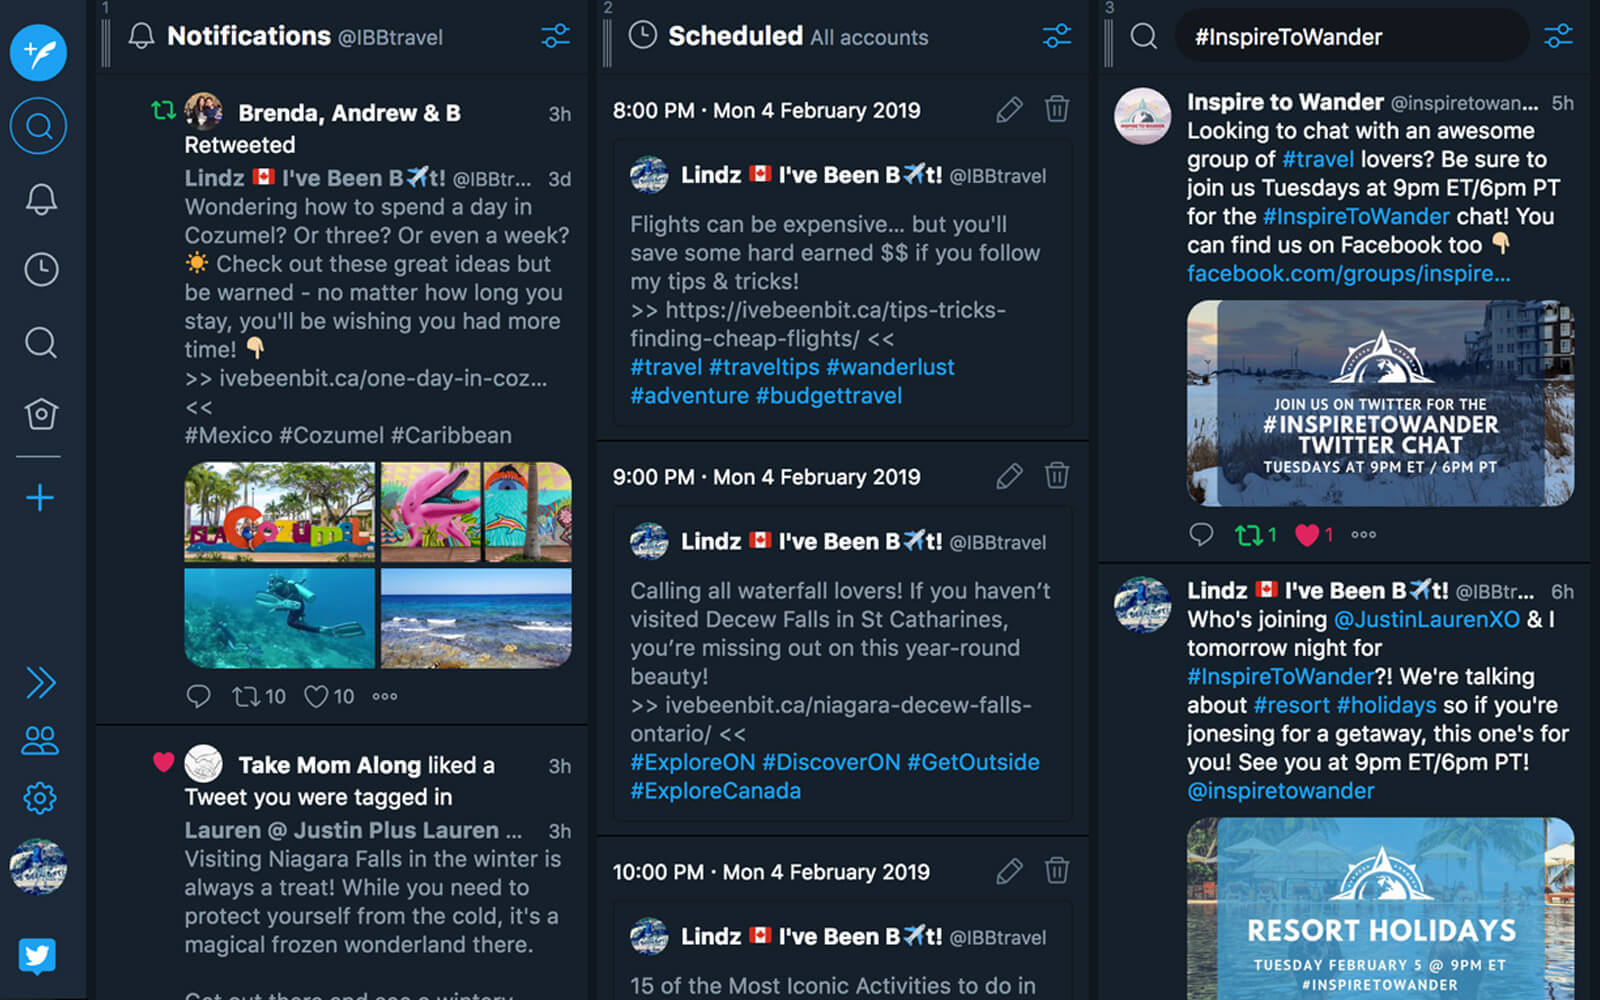 tweetdeck android review